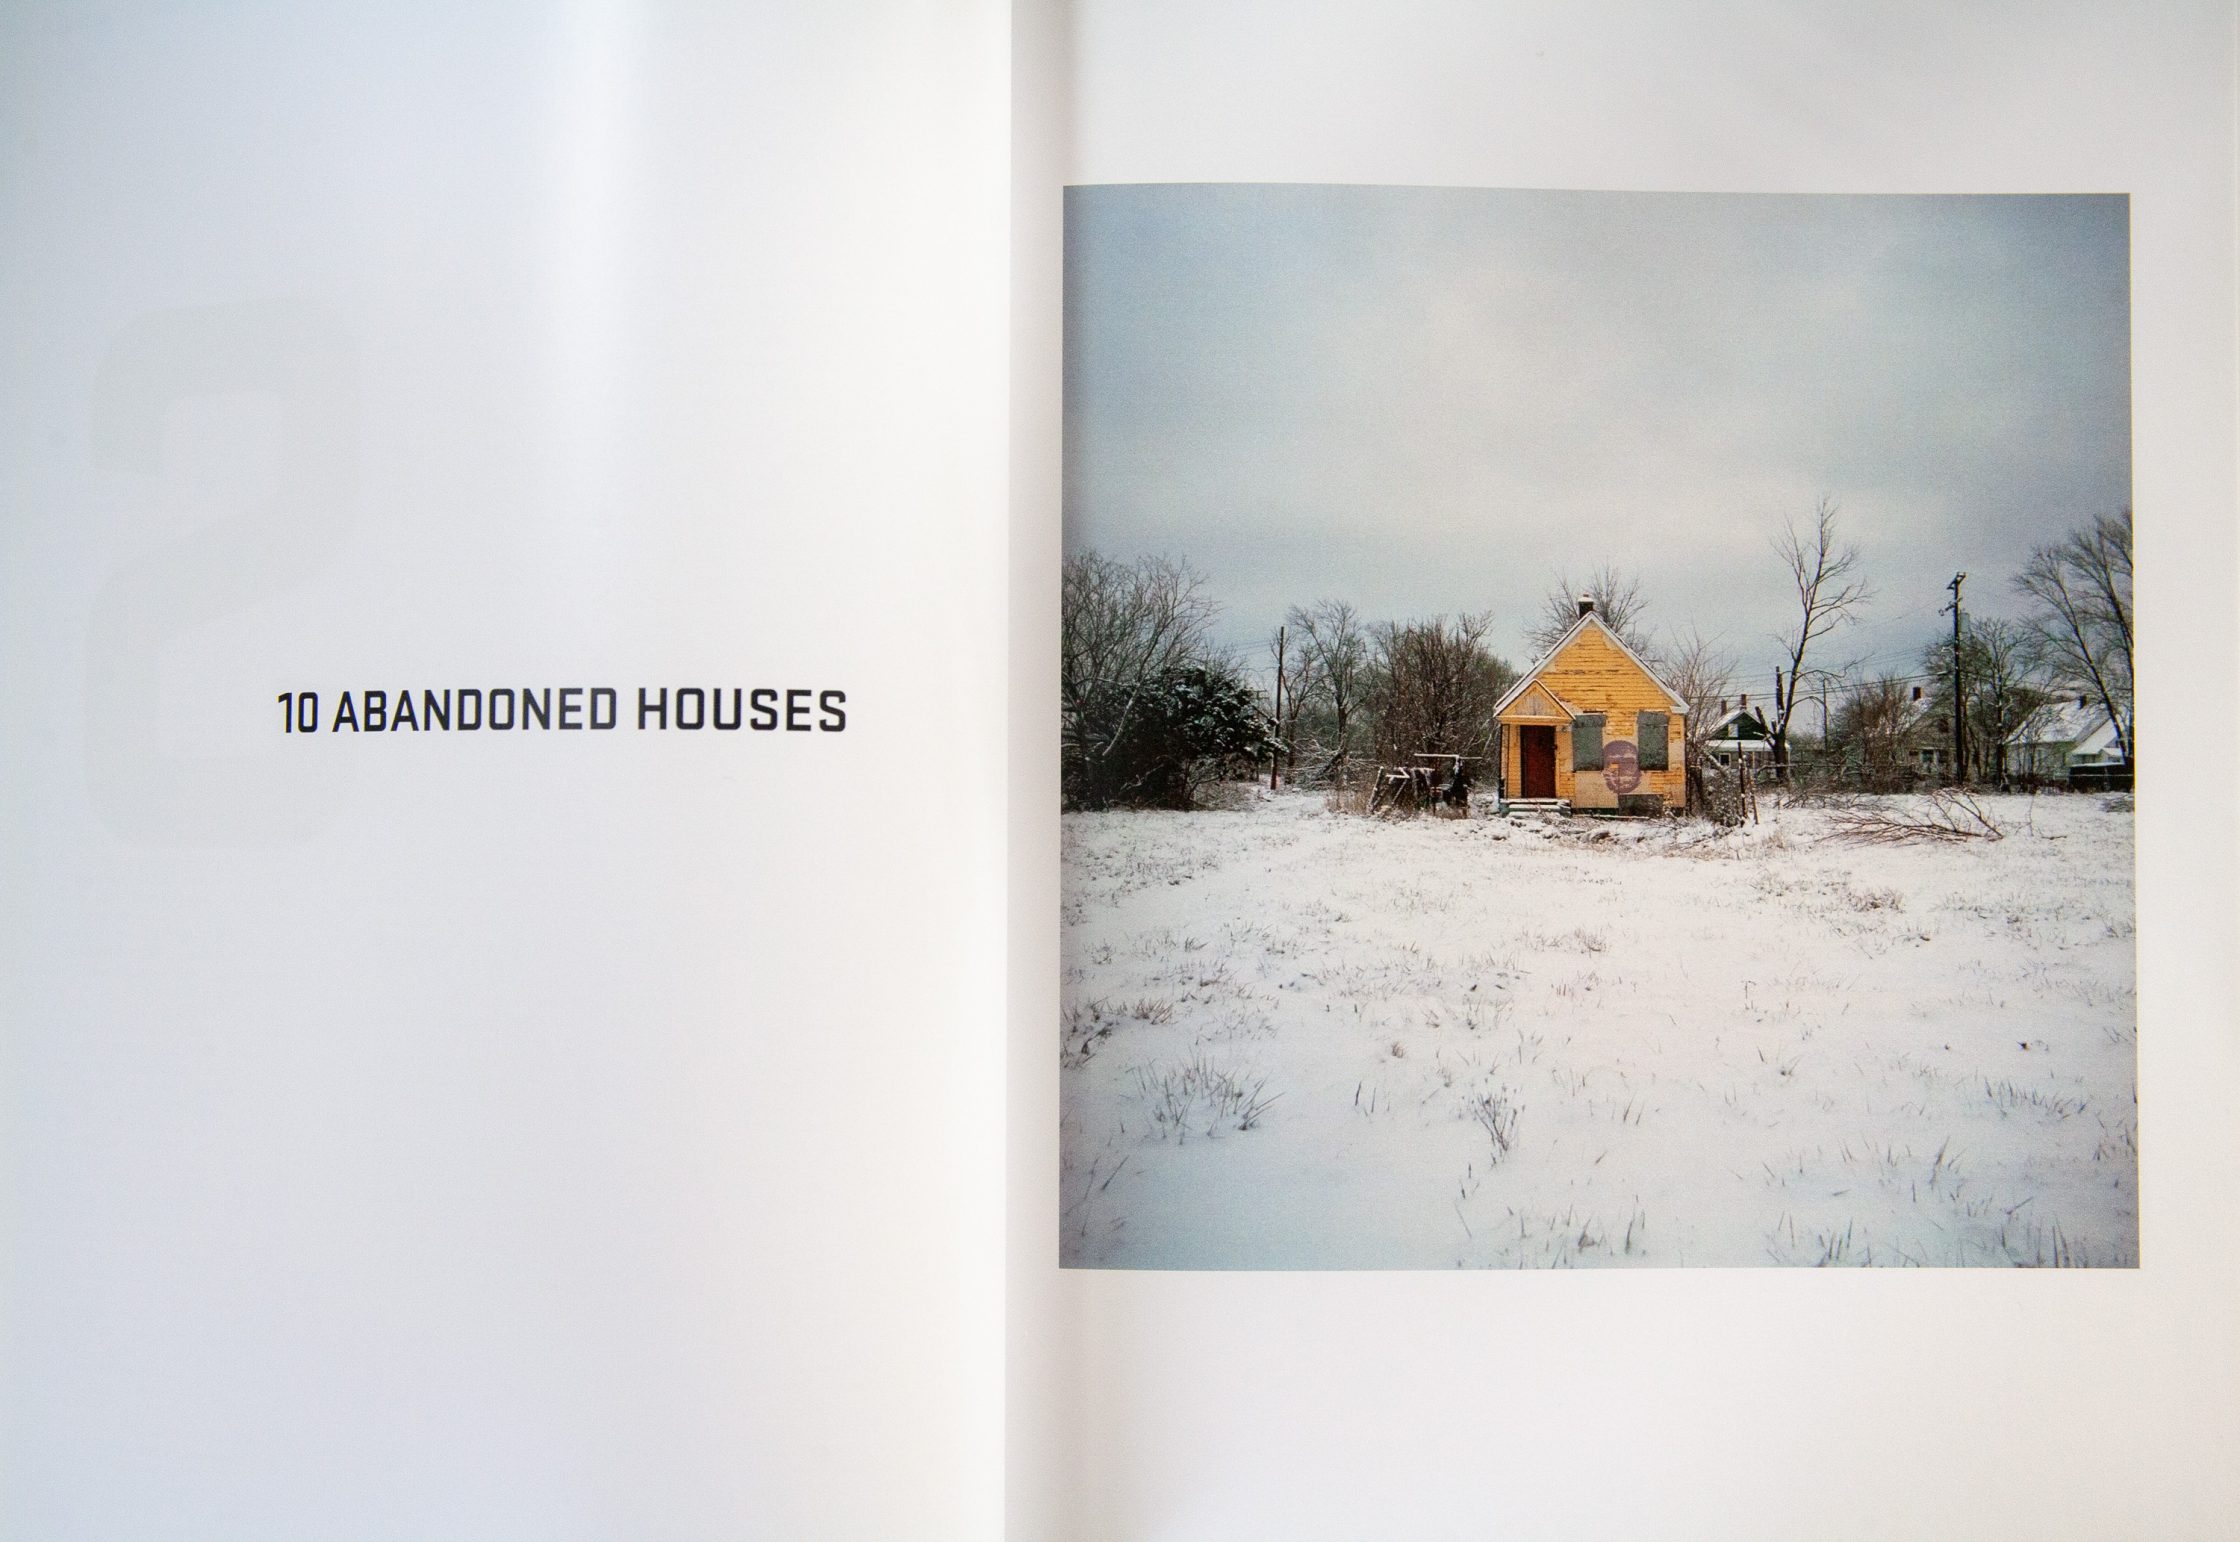 Abandoned houses. Words and photography. Under the Influence.